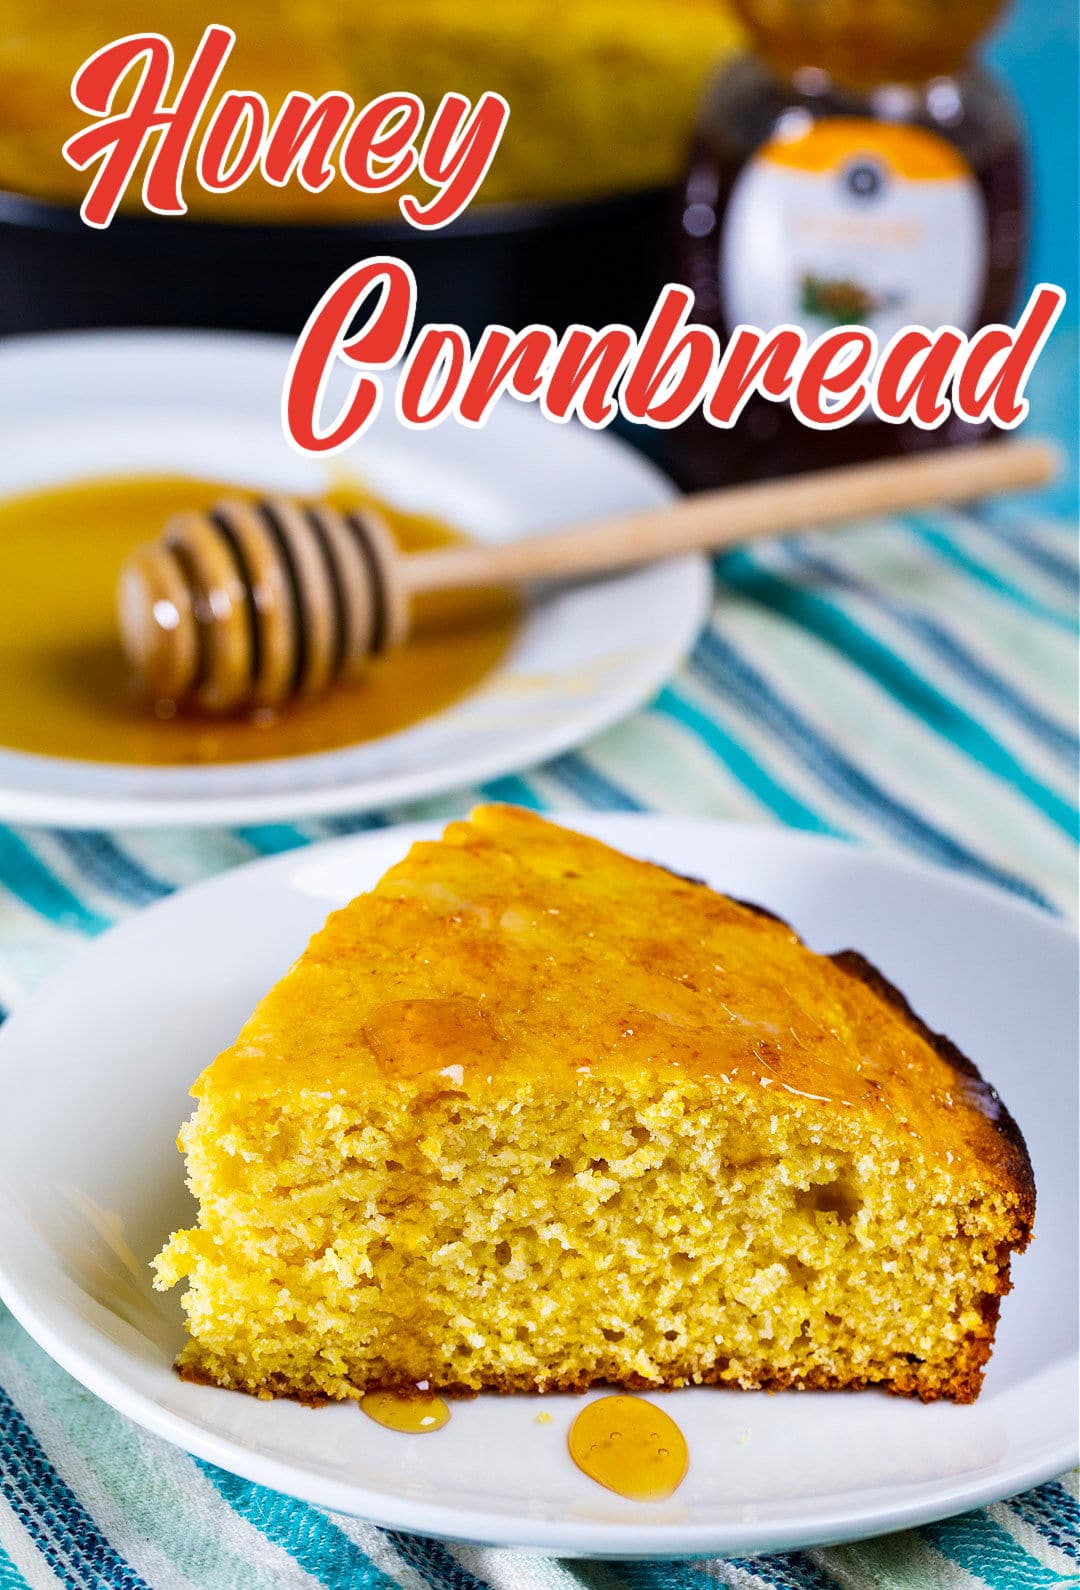 Slice of cornbread on a plate and plate with honey on it.